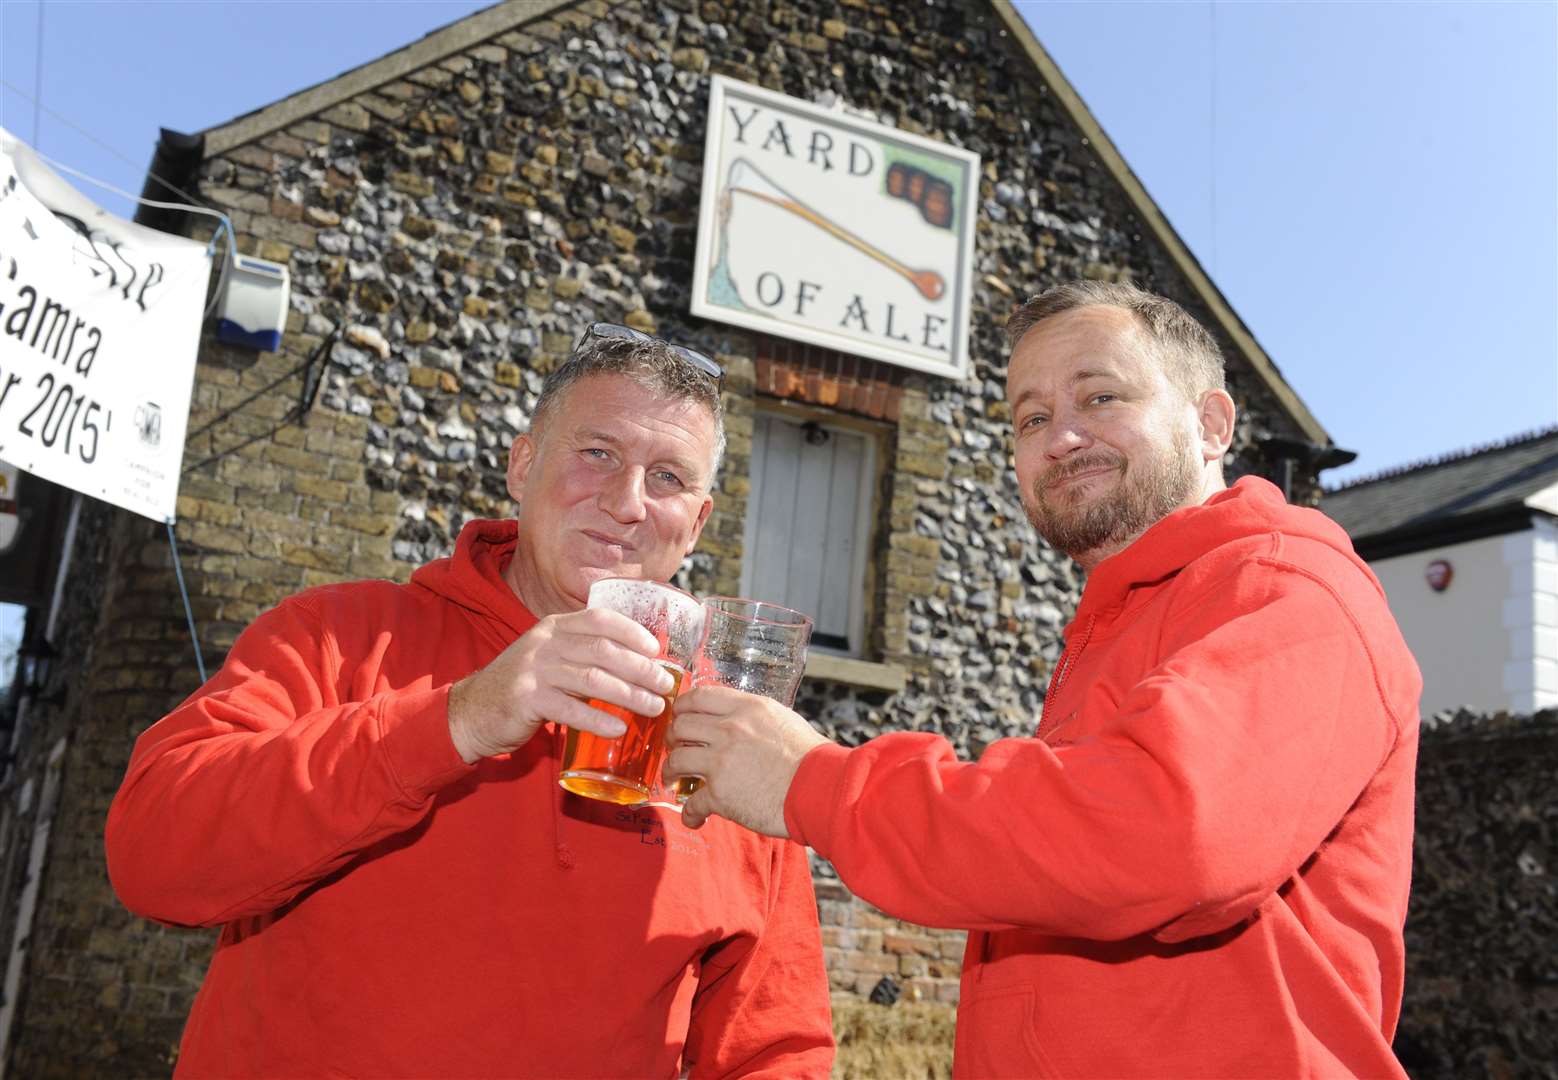 Shawn Galvin and Ian Noble when the Yard of Ale was crowned CAMRA’s Kent pub of the year in 2015. Picture: Tony Flashman